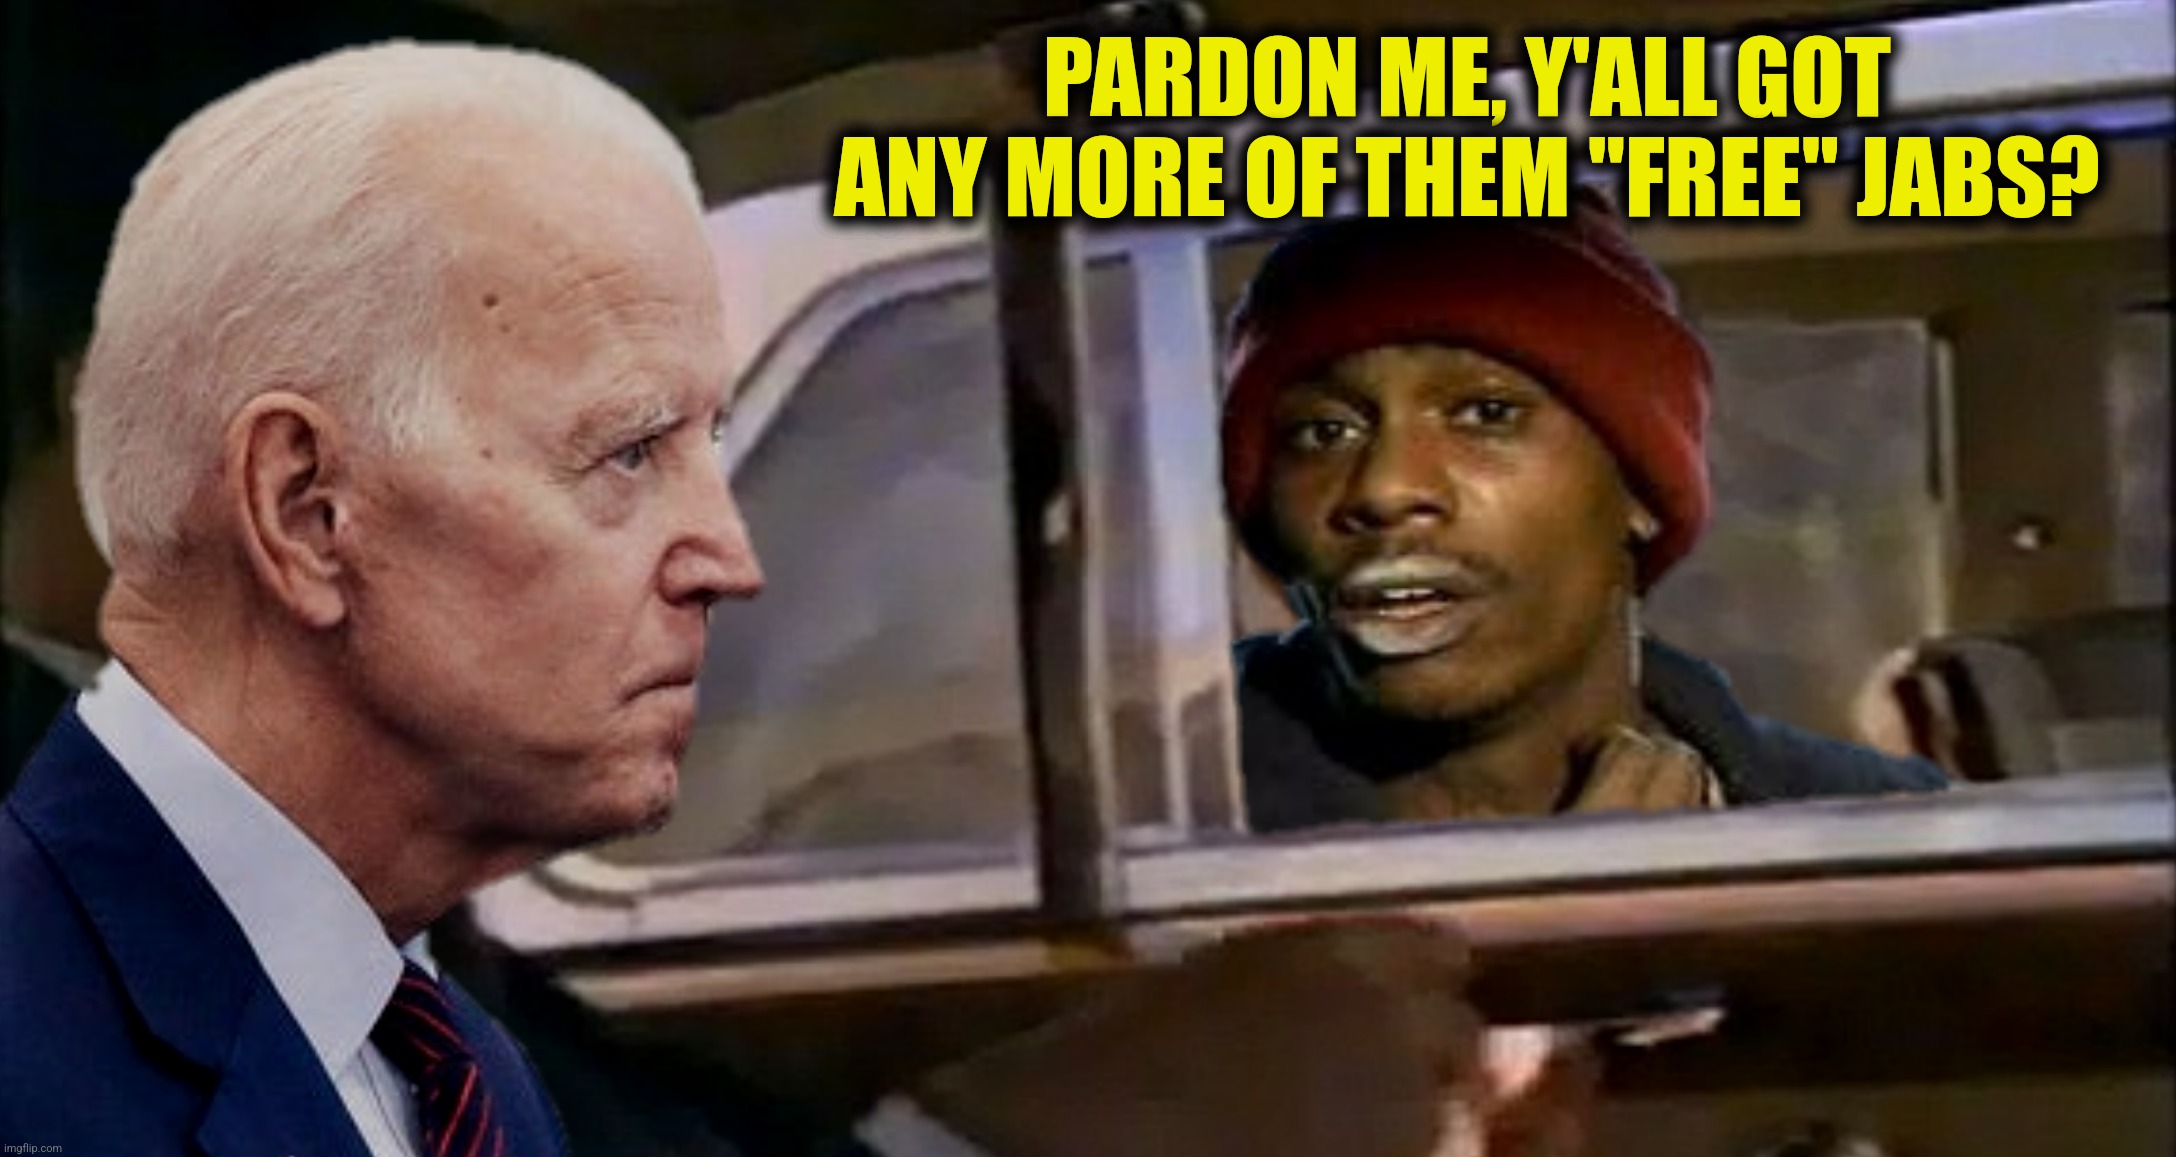 Bad Photoshop Sunday presents:  Brace yourselves, "free" "vaccines" may be coming to an end | PARDON ME, Y'ALL GOT ANY MORE OF THEM "FREE" JABS? | image tagged in bad photoshop sunday,joe biden,yall got any more of,grey poupon,jabs | made w/ Imgflip meme maker